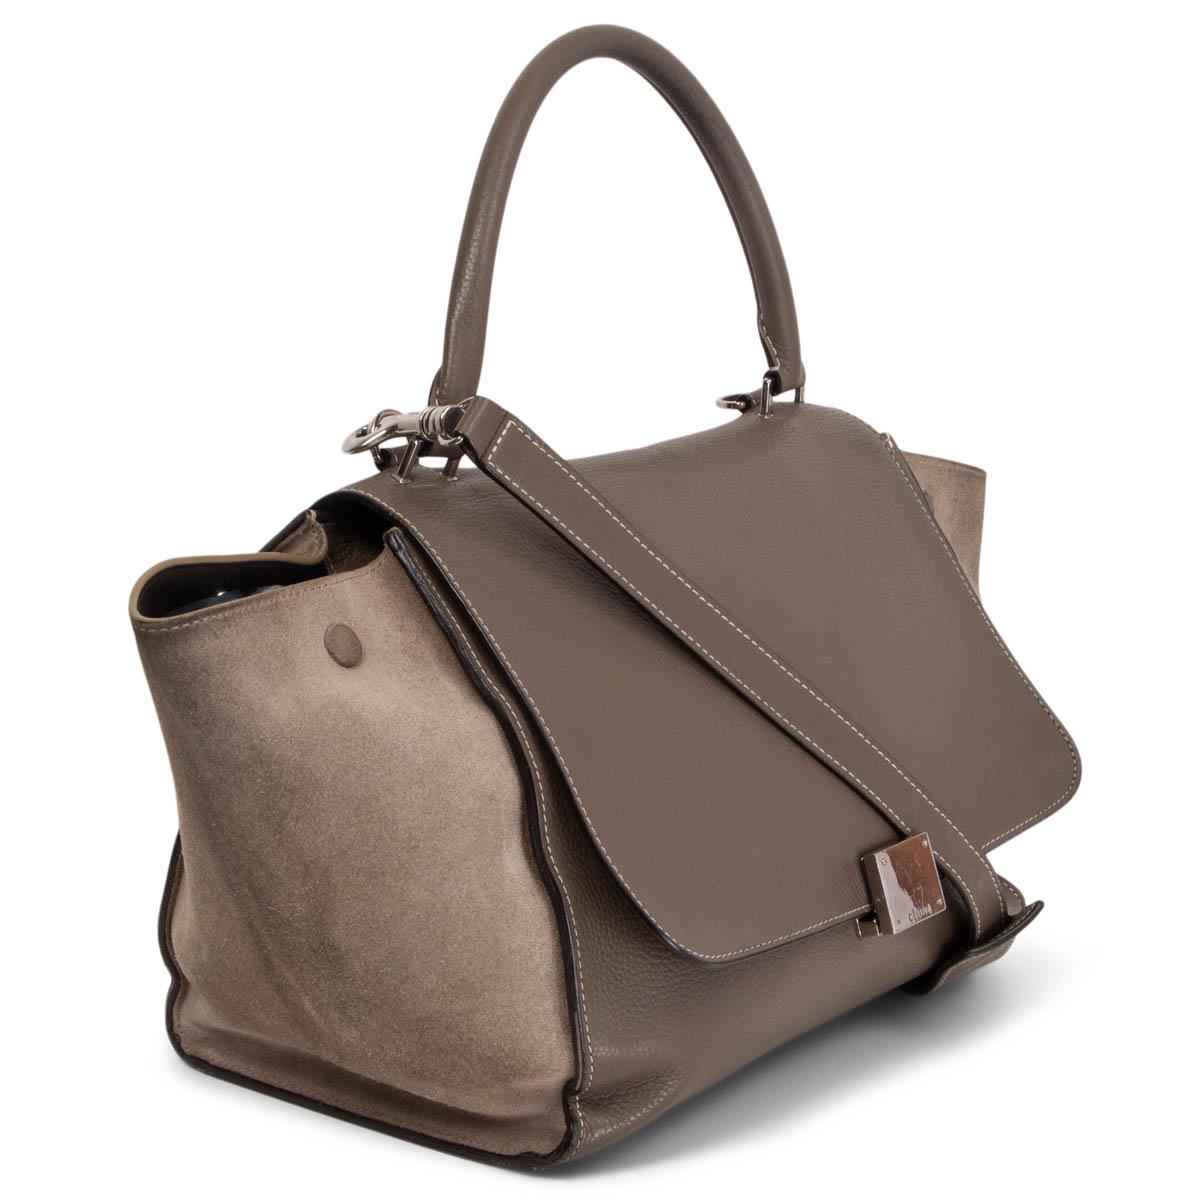 100% authentic Céline Trapeze shoulder bag in taupe grained calfskin and light taupe suede side parts. One zipper pocket on the back. Opens with zipper on top. Lined in brown lambskin with two  slit pocket against the back. Has been carried with